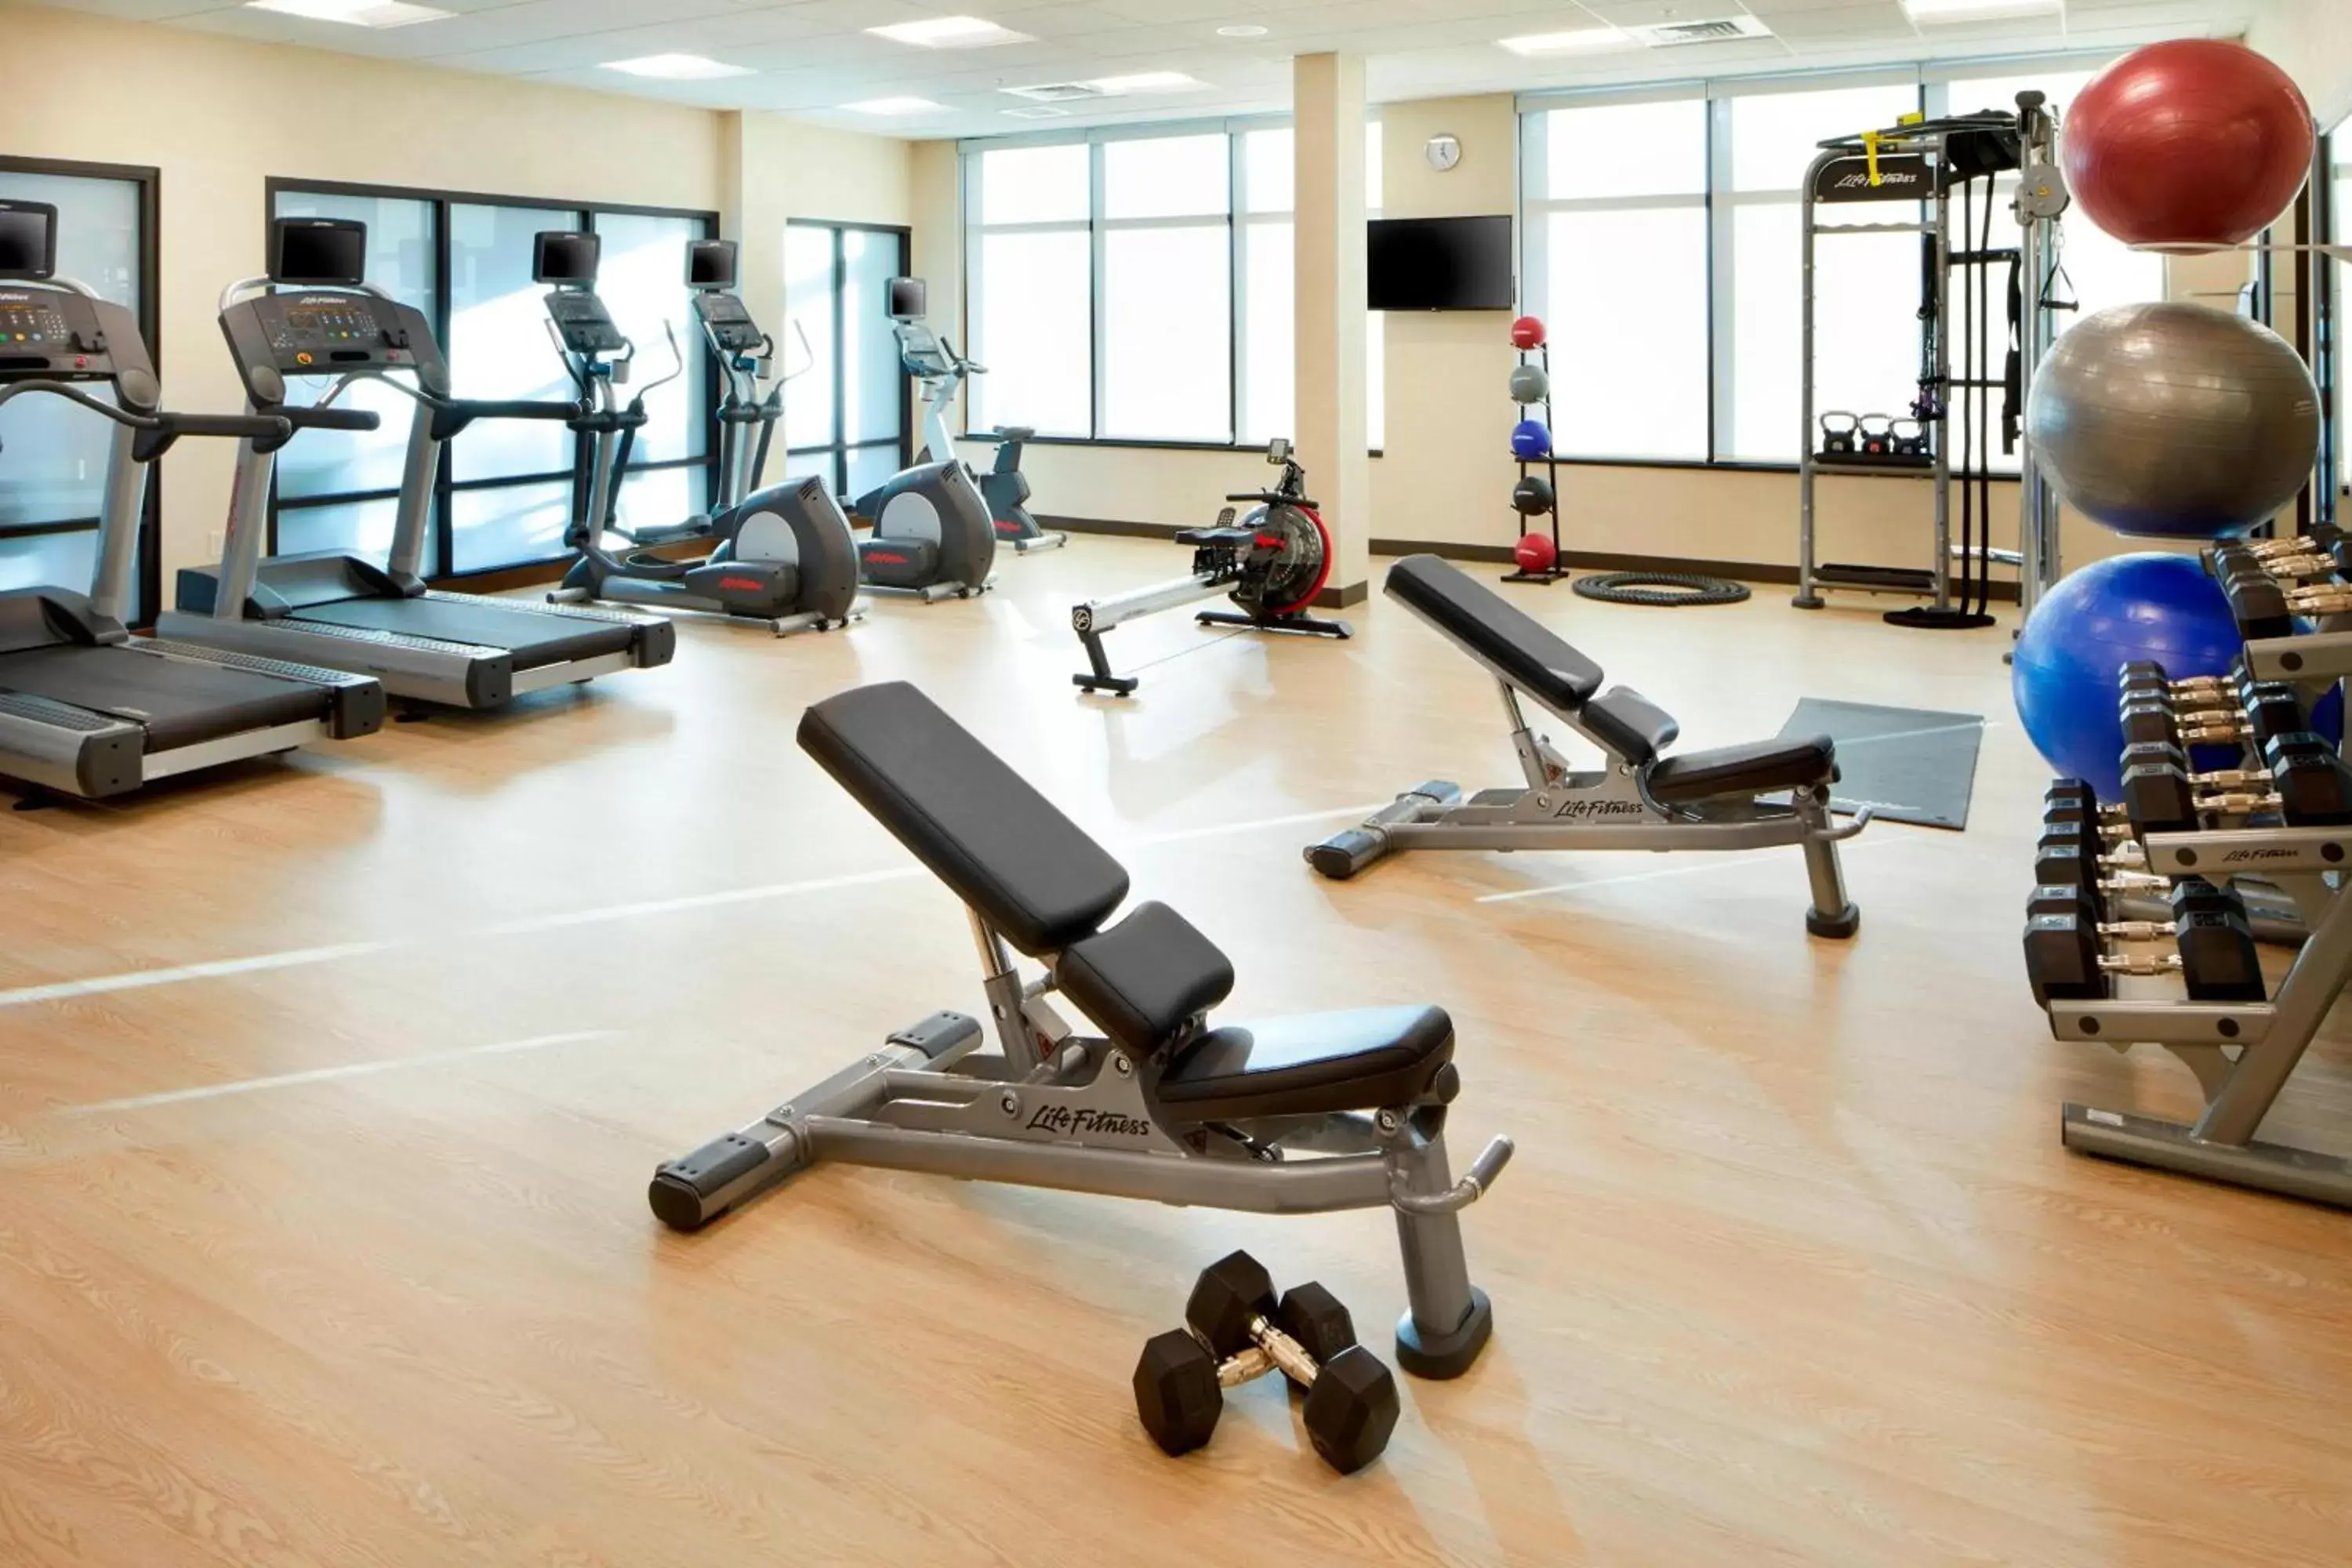 Fitness centre/facilities, Fitness Center/Facilities in Courtyard by Marriott Charlotte Fort Mill, SC